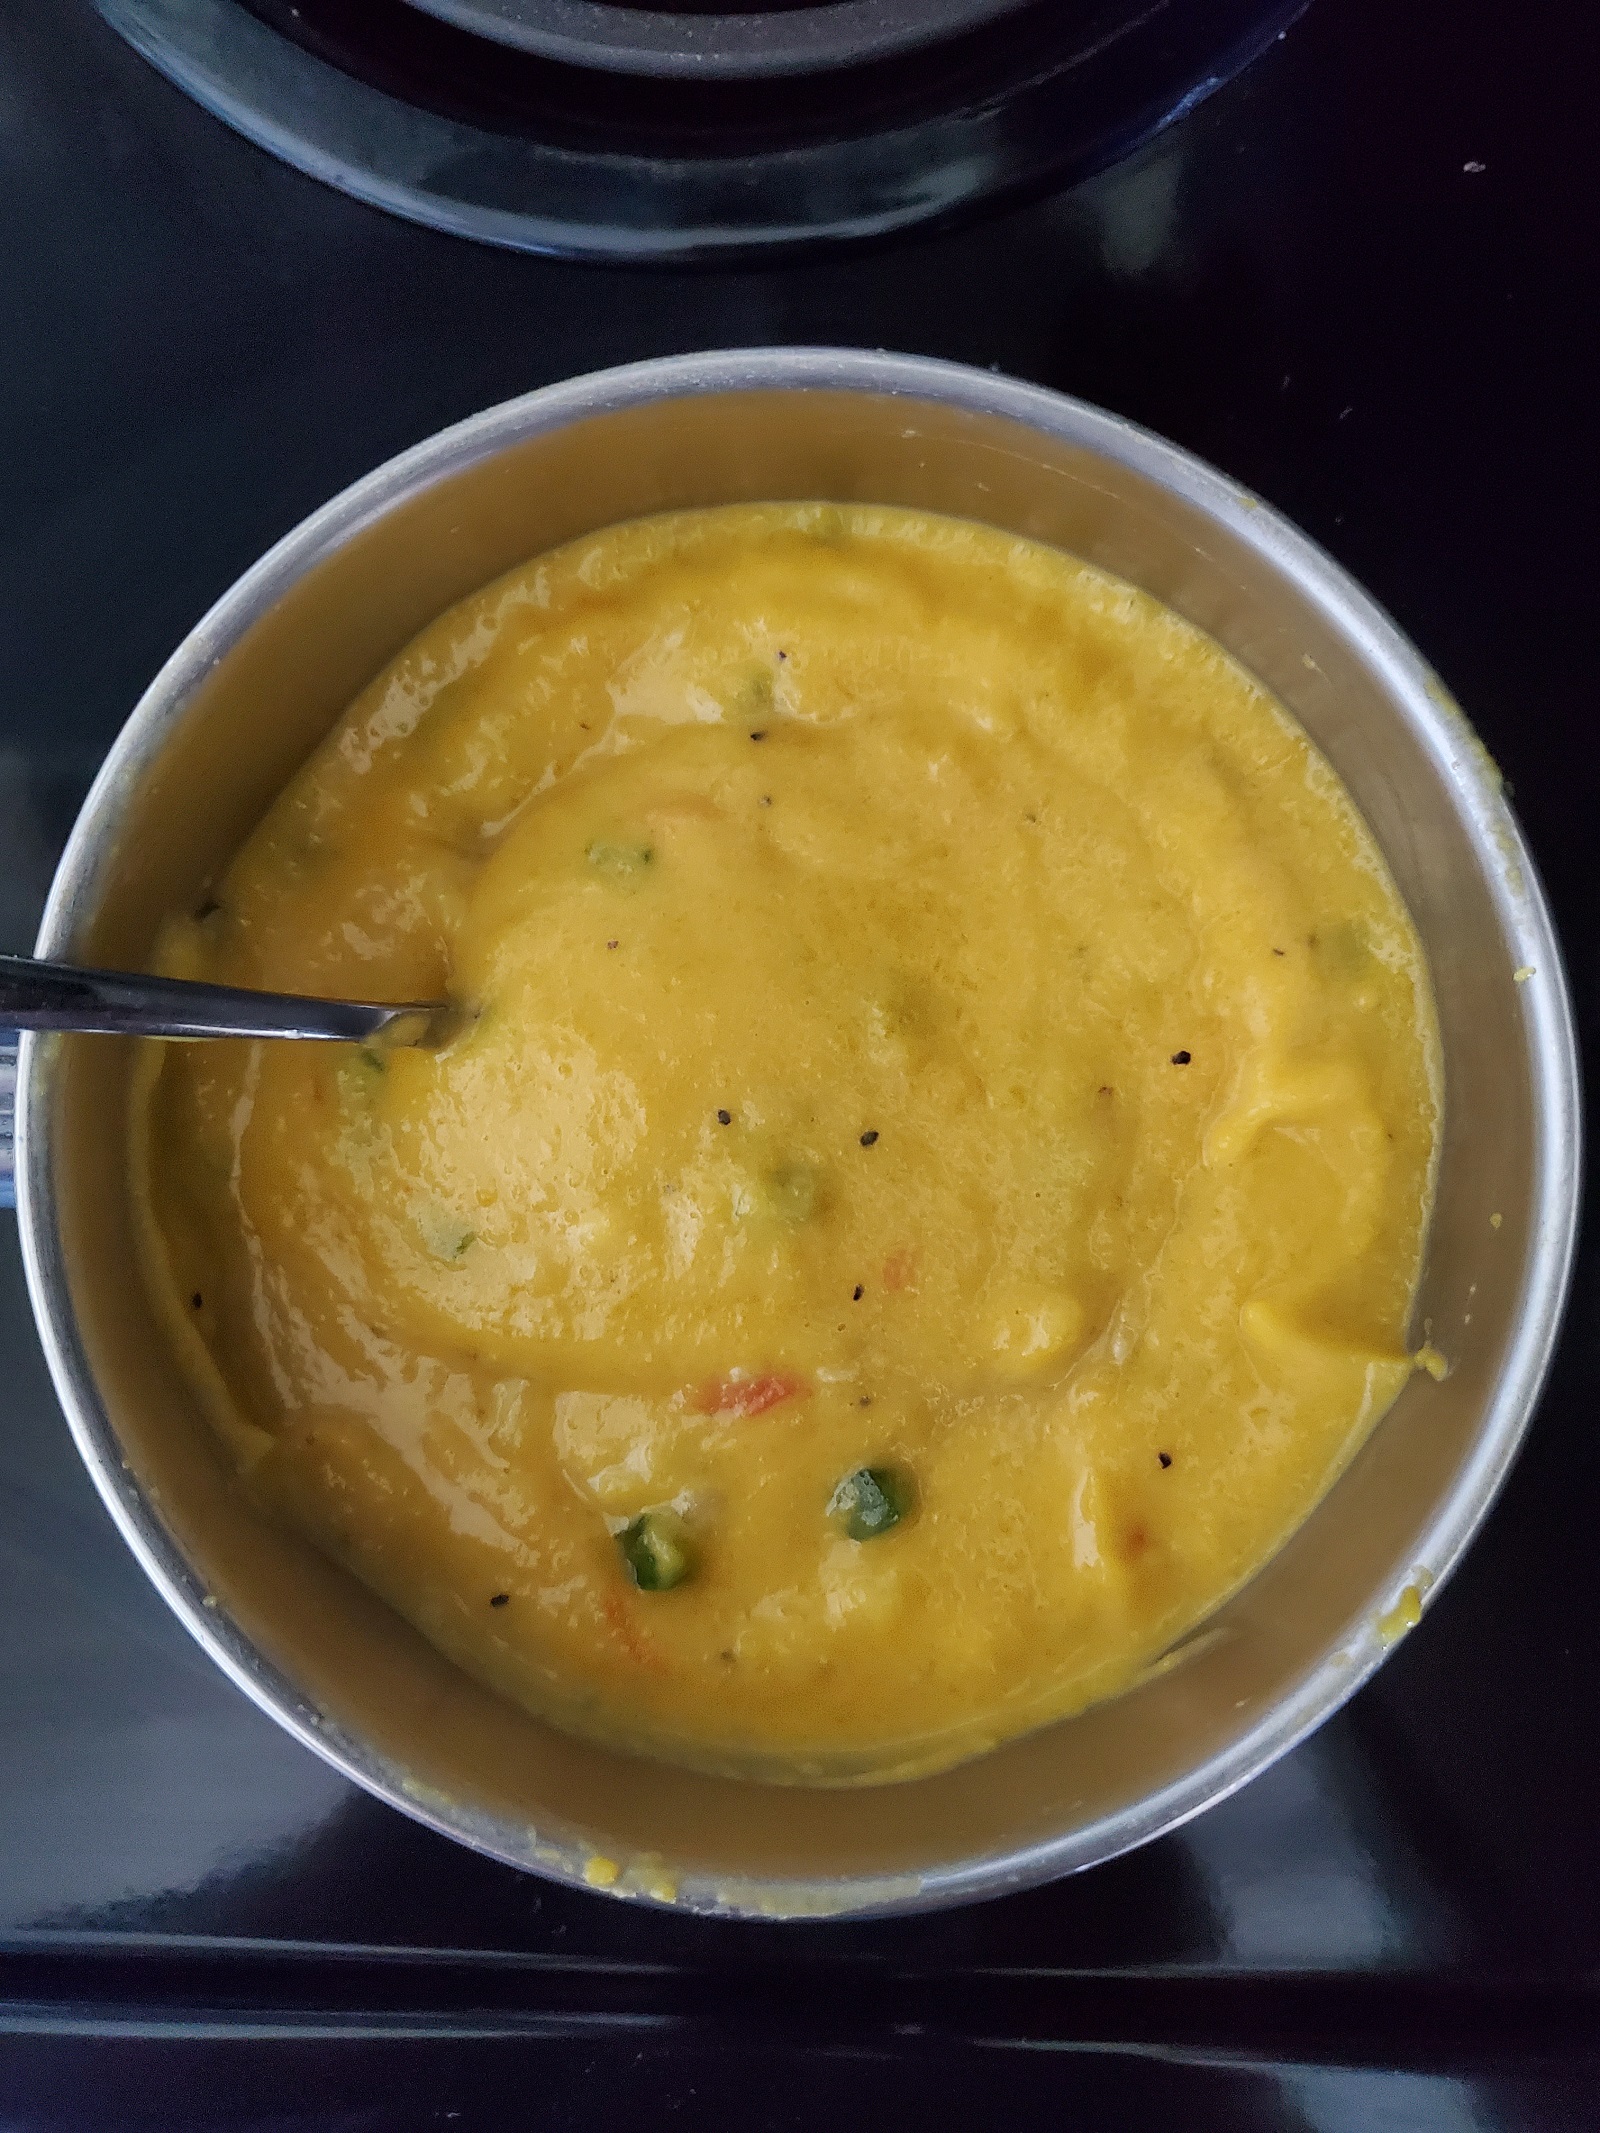 Picture of pumpkin soup made with coconut milk and optional ingredients in a metal saucepan.